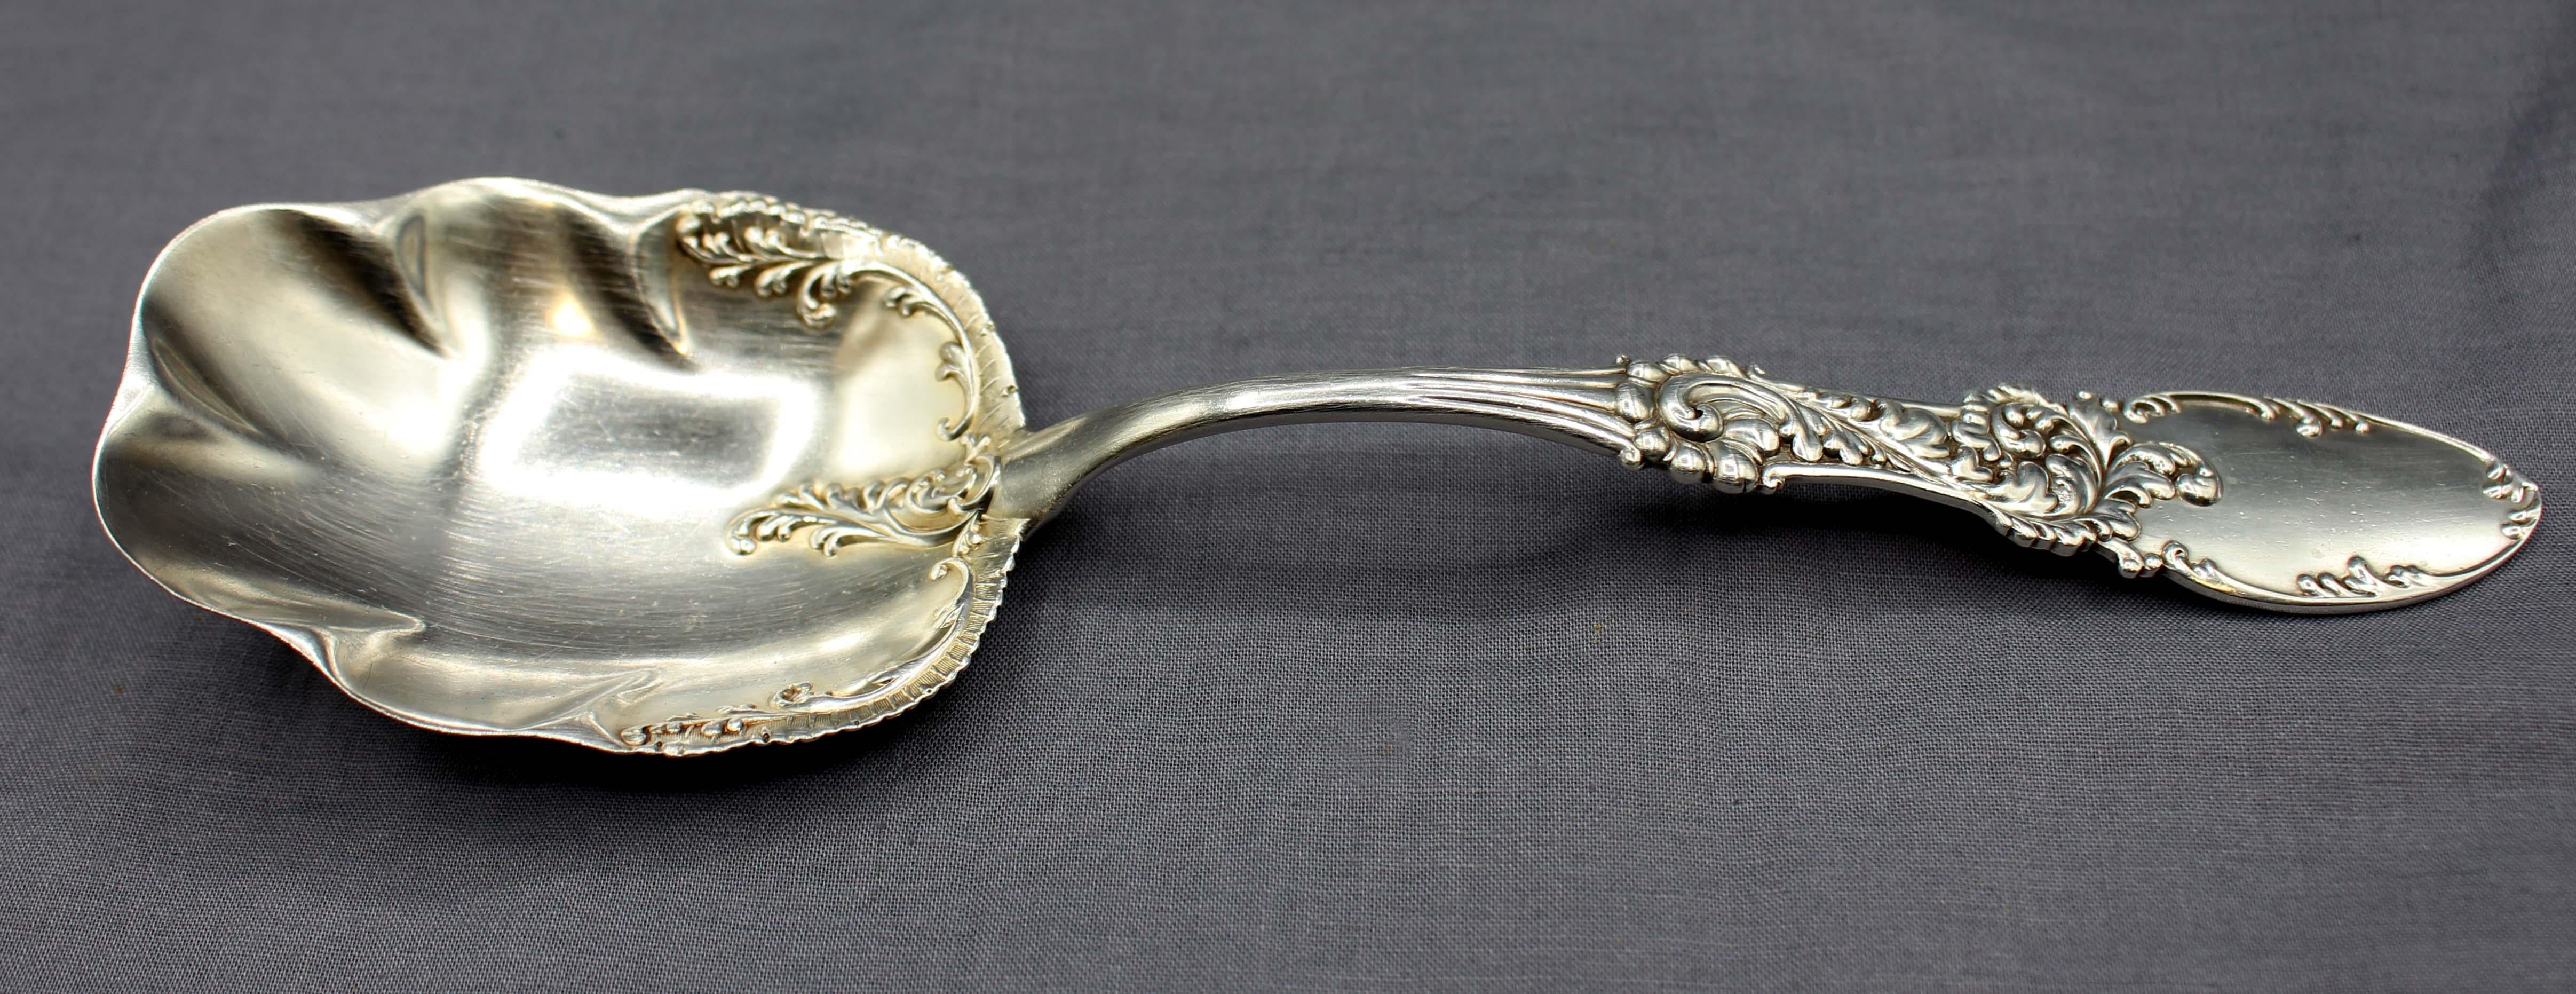 1893 sterling silver berry spoon by Frank Whiting. This ornate spoon is not of a listed pattern. 2.45 troy oz.
8 3/4